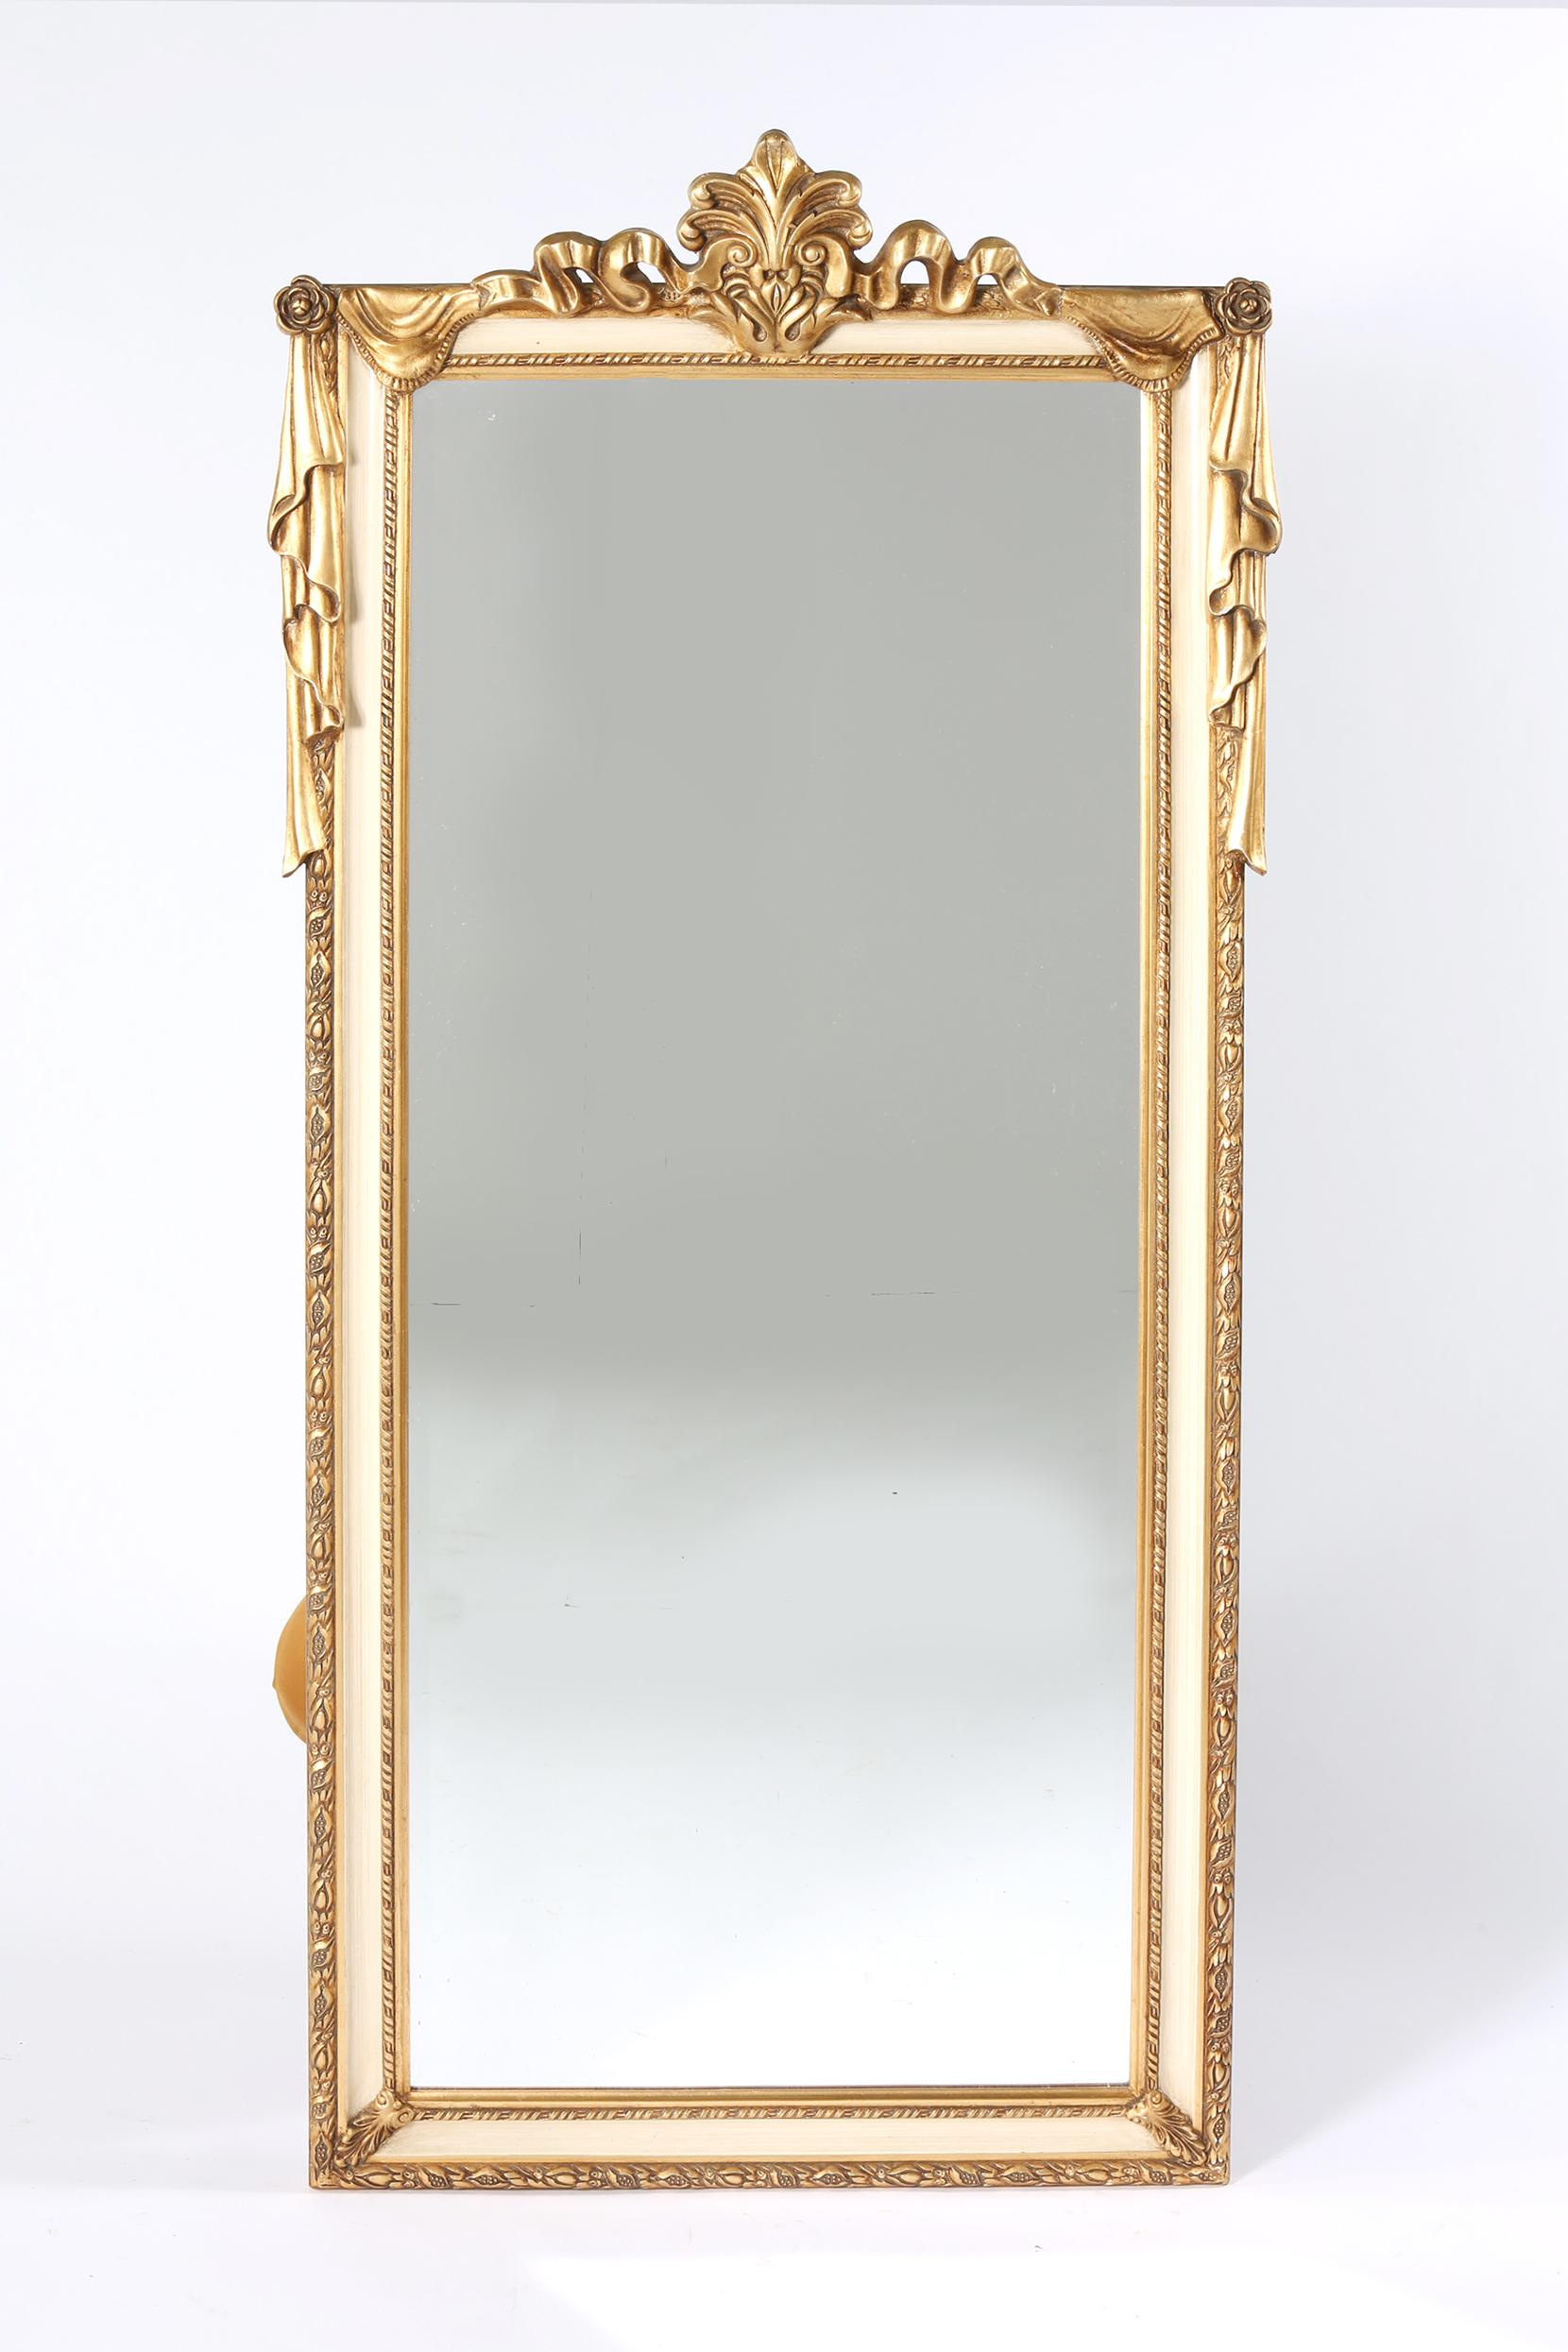 Mid-20th century pair giltwood framed beveled hanging wall mirror with top design details. Each wall mirror is in great condition with minor wear consistent with age / use. The mirror stand about 62.5 high x 25.5 inches wide.